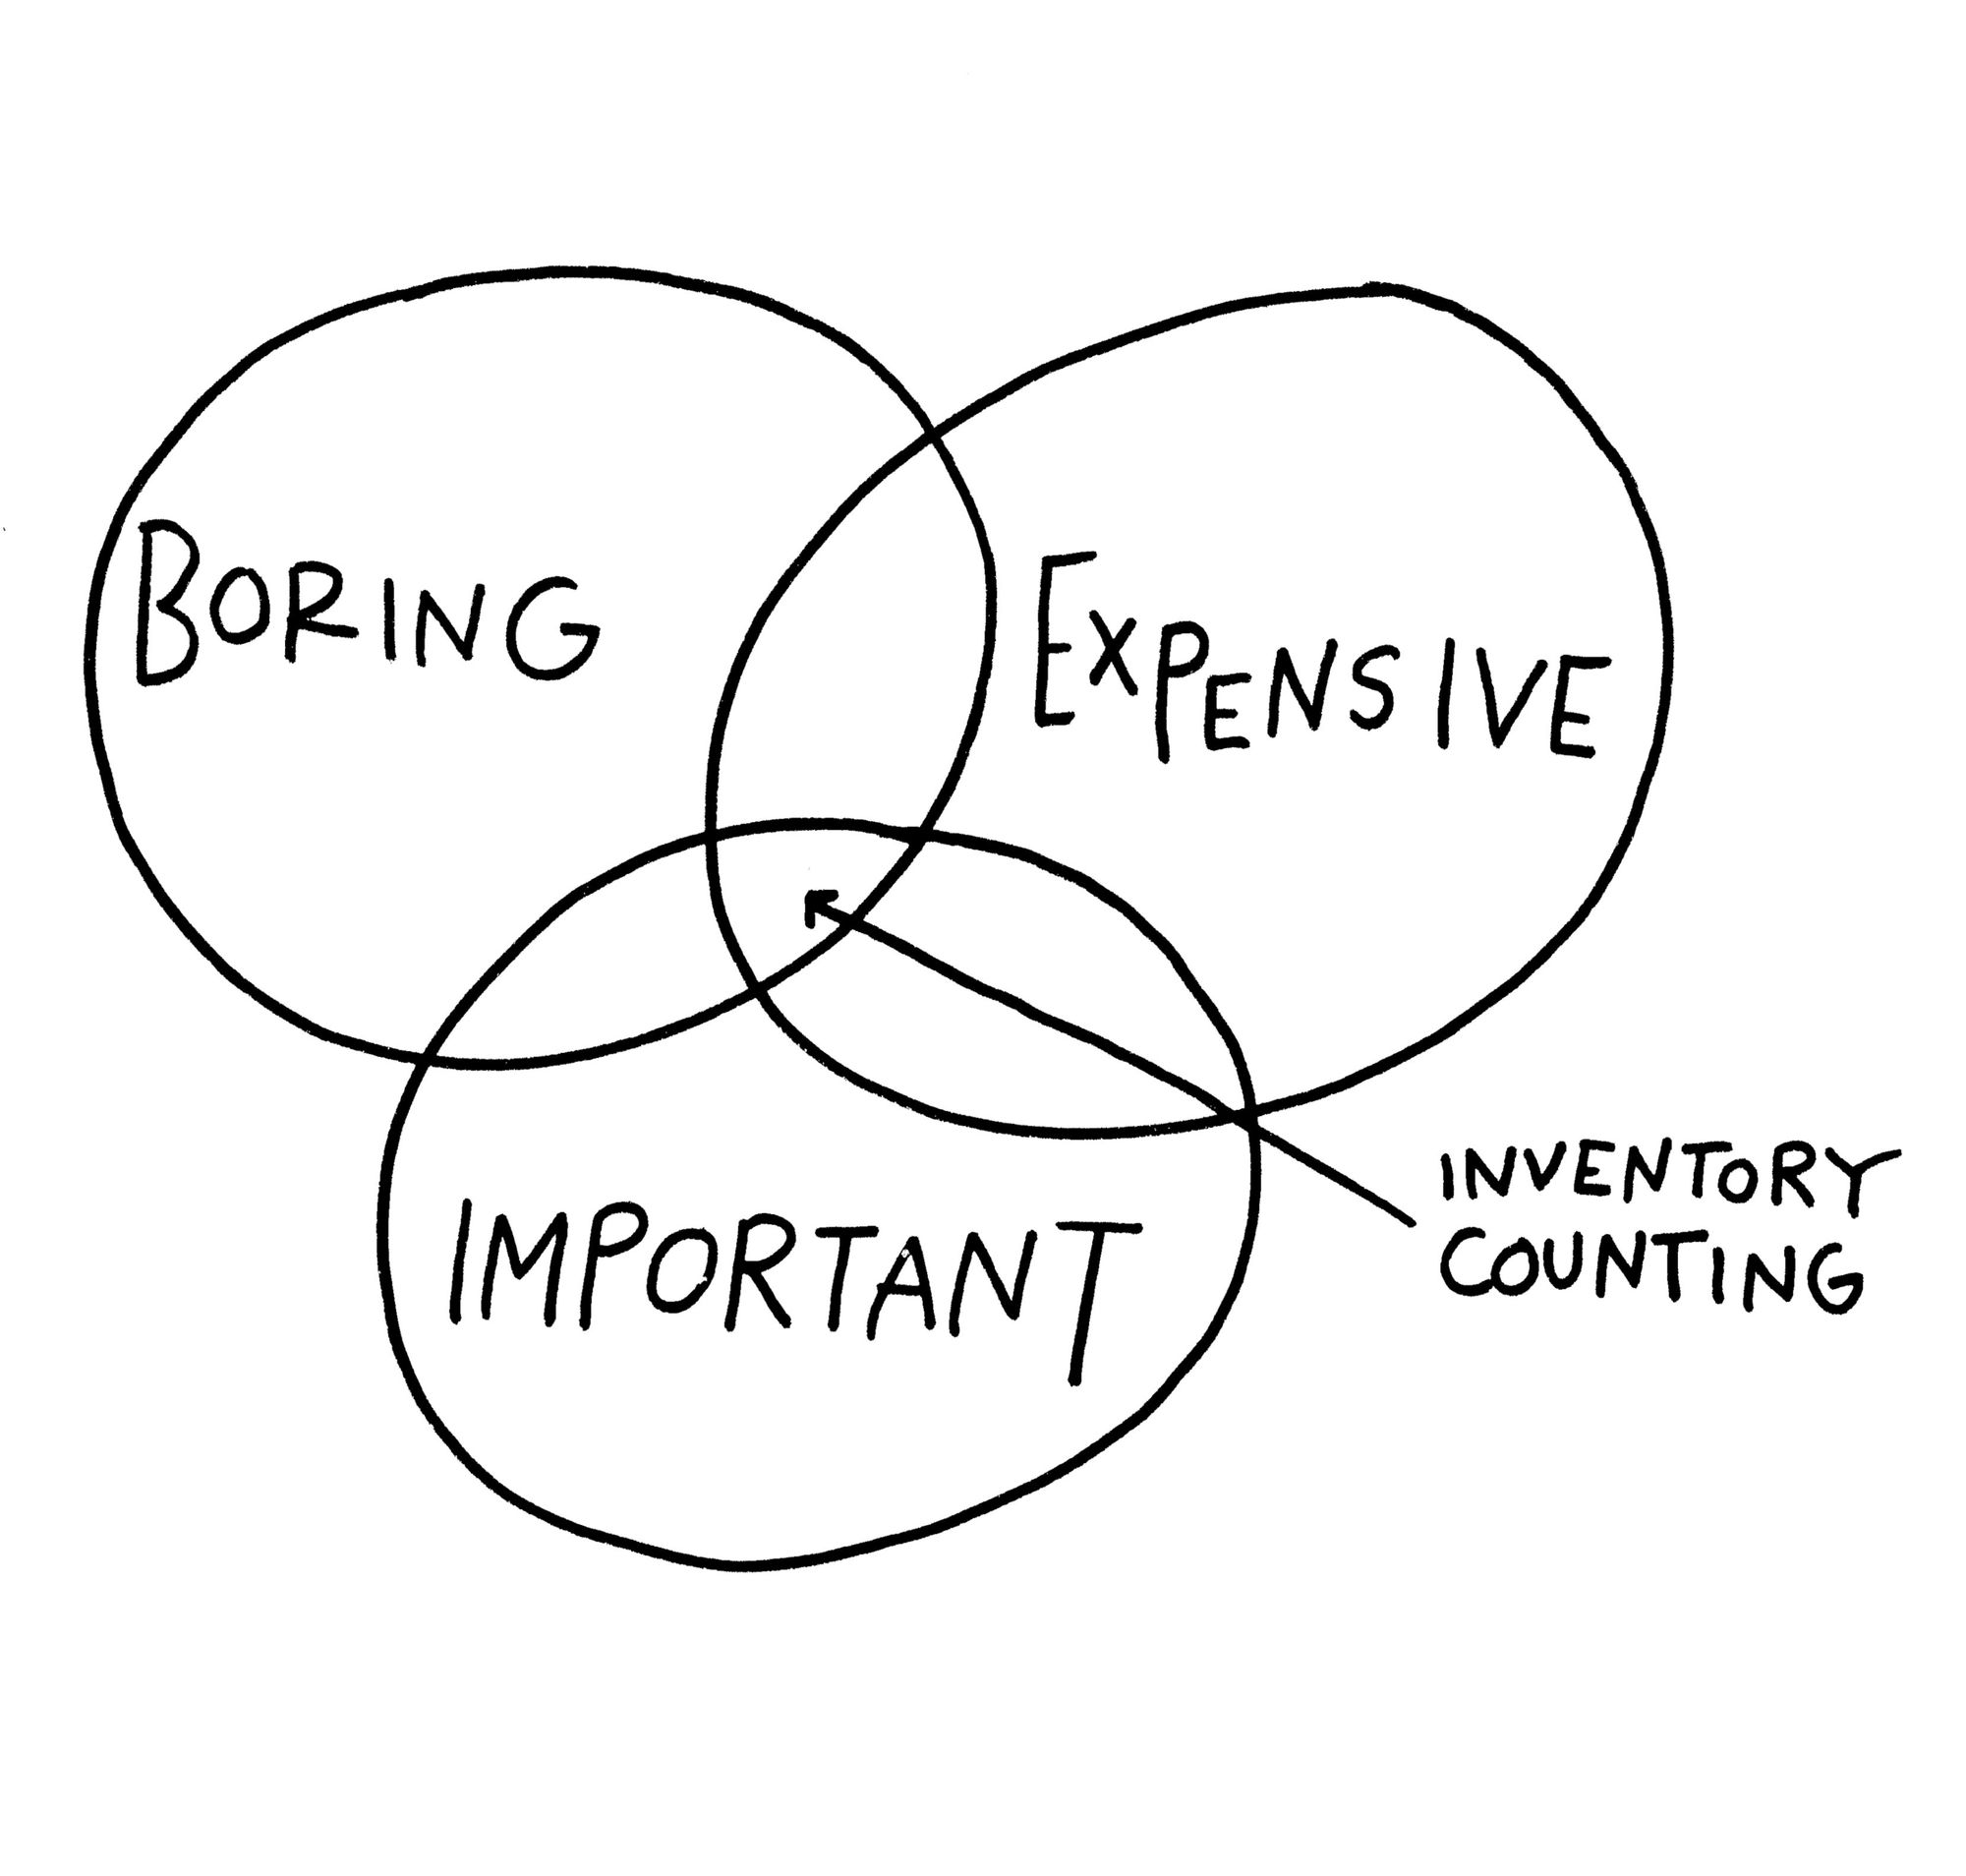 A venn diagram with three circles titled &ldquo;Boring&rdquo;, &ldquo;Expensive&rdquo; and &ldquo;Important&rdquo;. There is an arrow that points &ldquo;Inventory Counting&rdquo; to the intersection of those three.